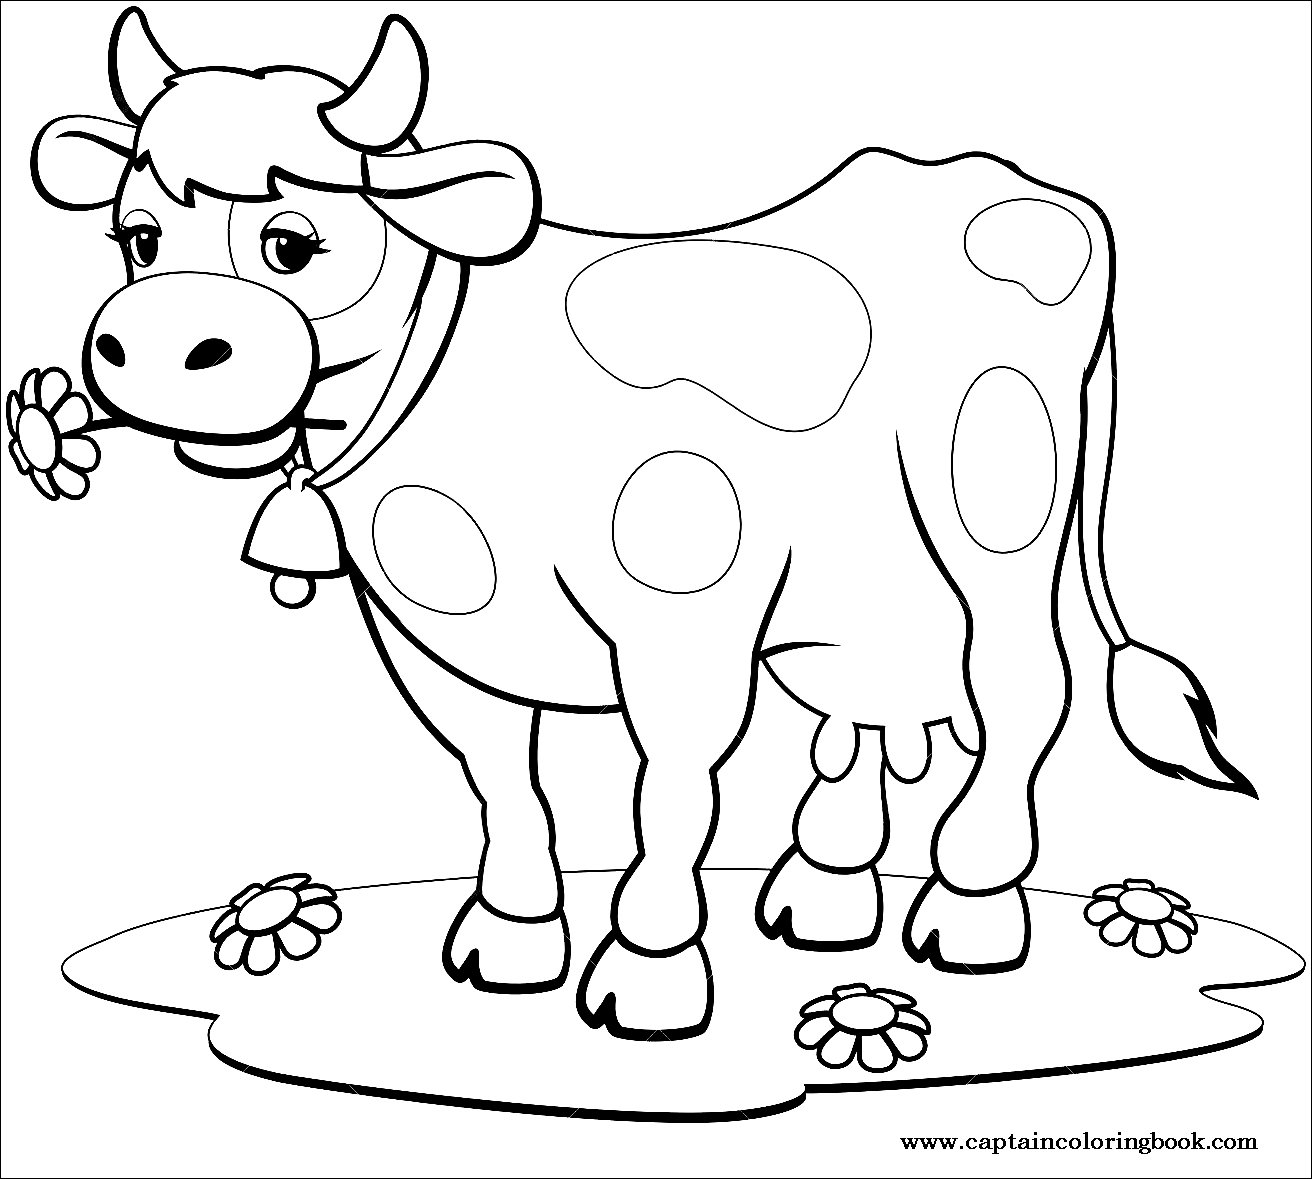 Zani cow coloring book for toddlers 2 3 years old